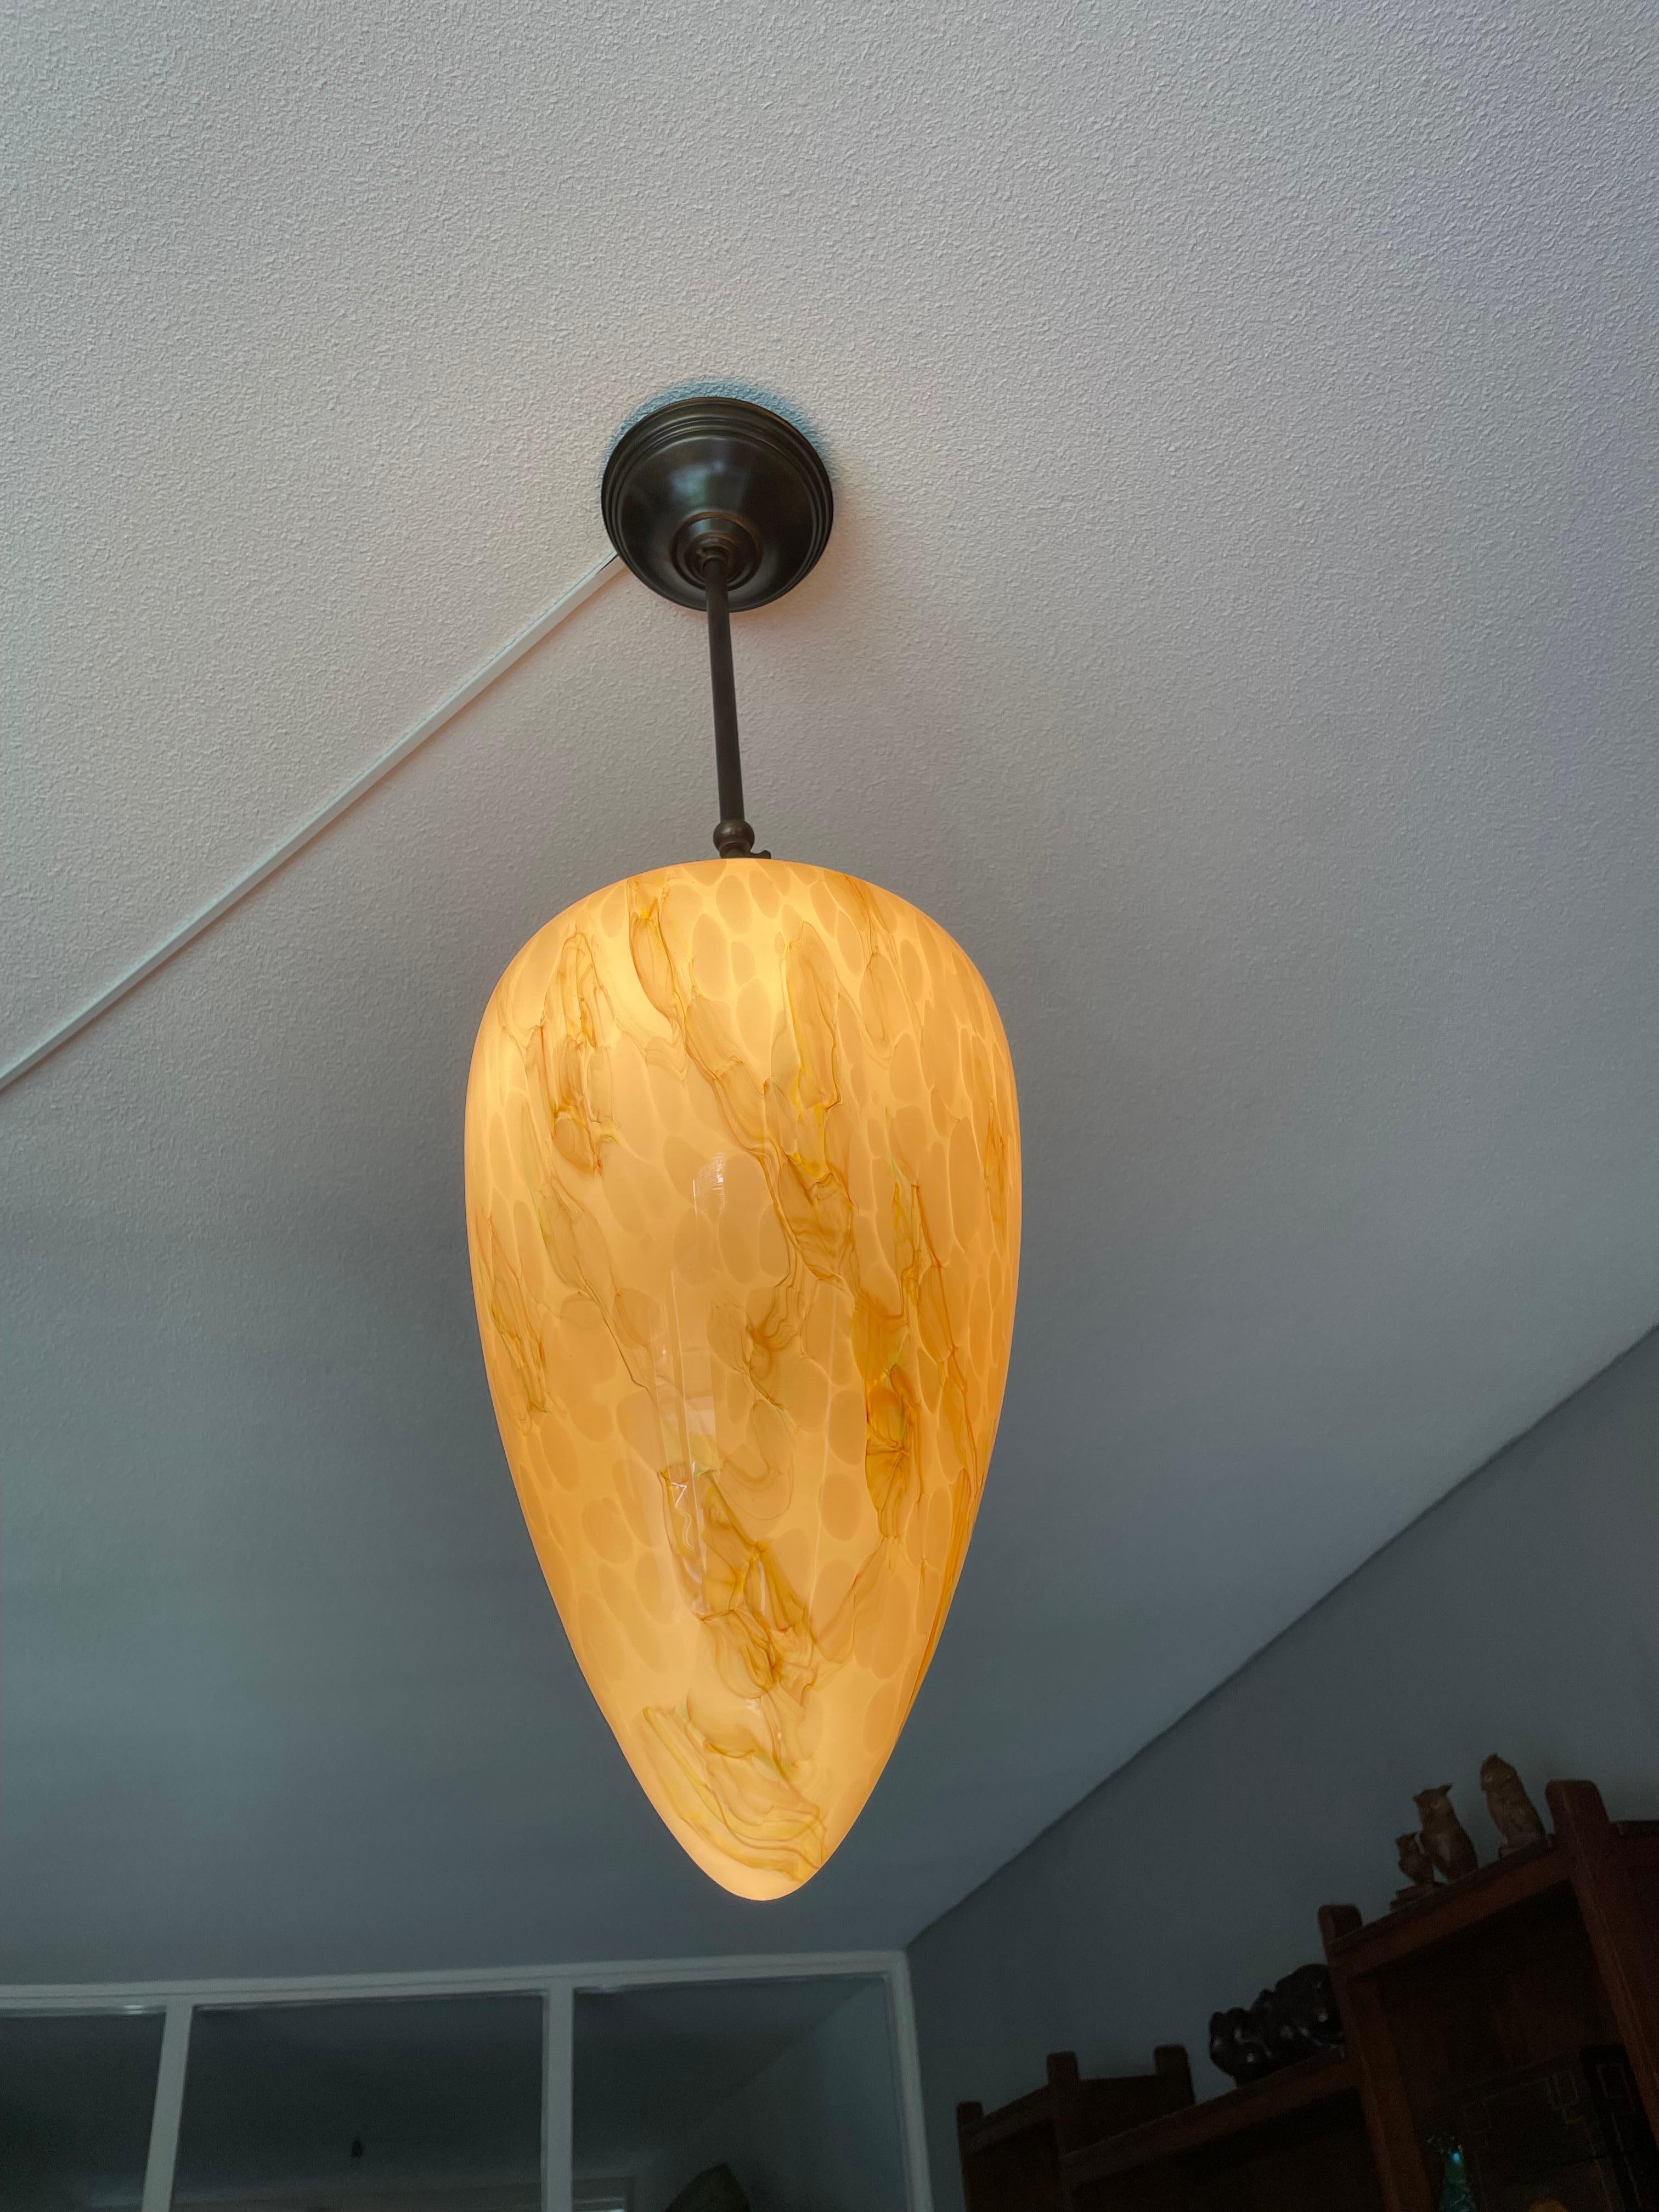 Incredibly beautiful, mouthblown glass, adjustable in height light fixture with a marble-look surface with amazing colors.

This rare, beautifully designed, upside-down cone shape pendant is destined to grace someone's entrance, stairwell, landing